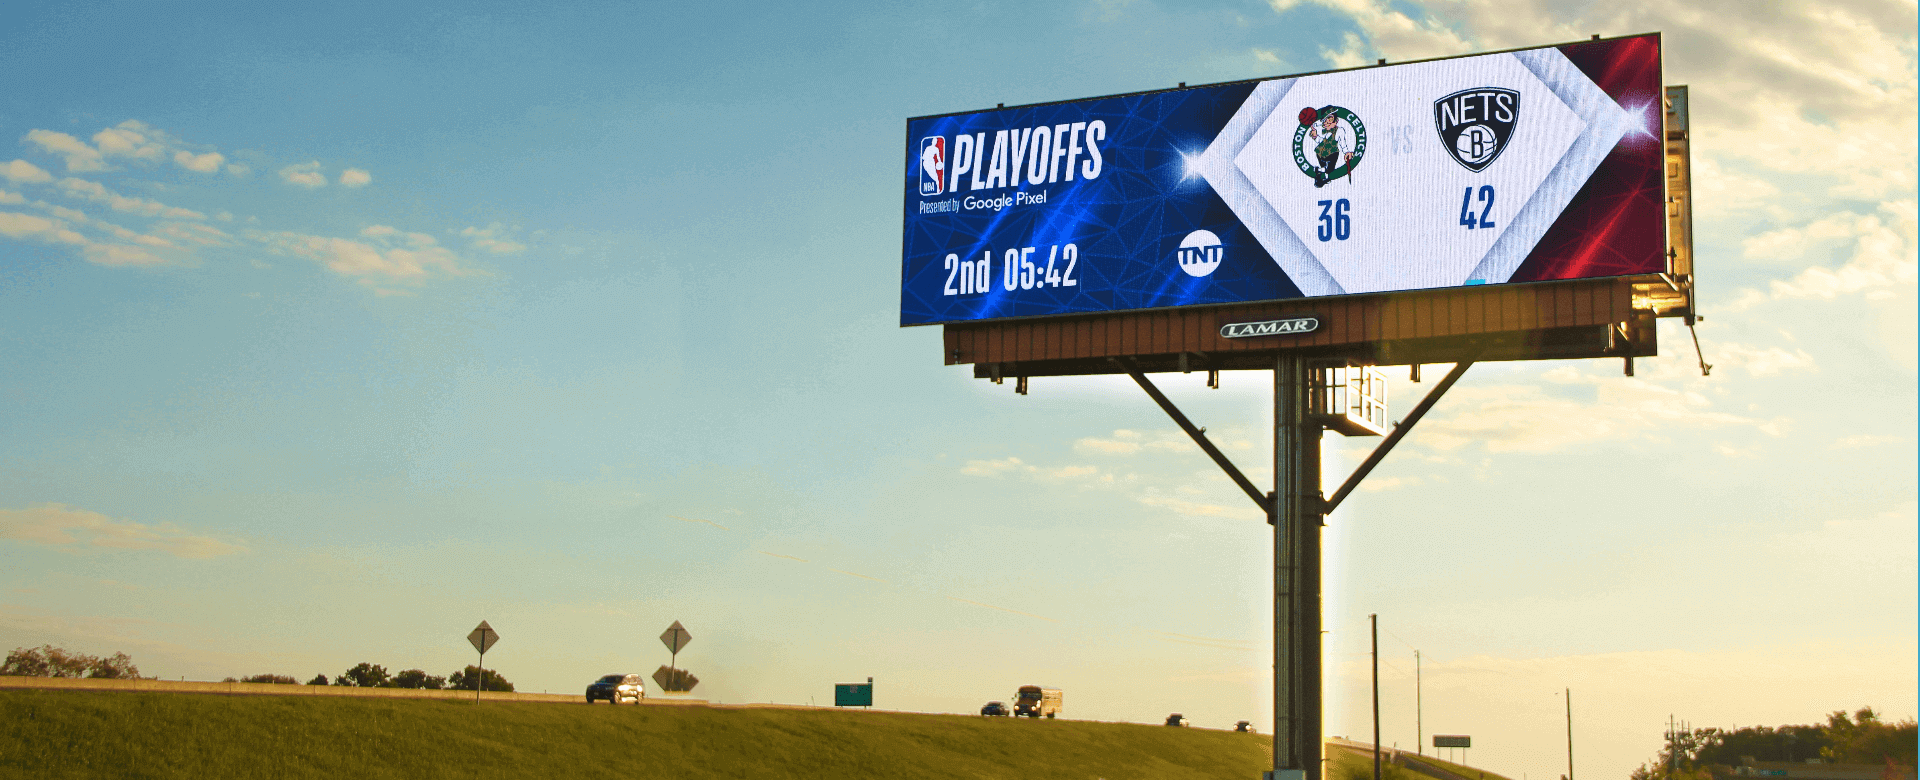 DOOH large format billboard with an NBA advertisement